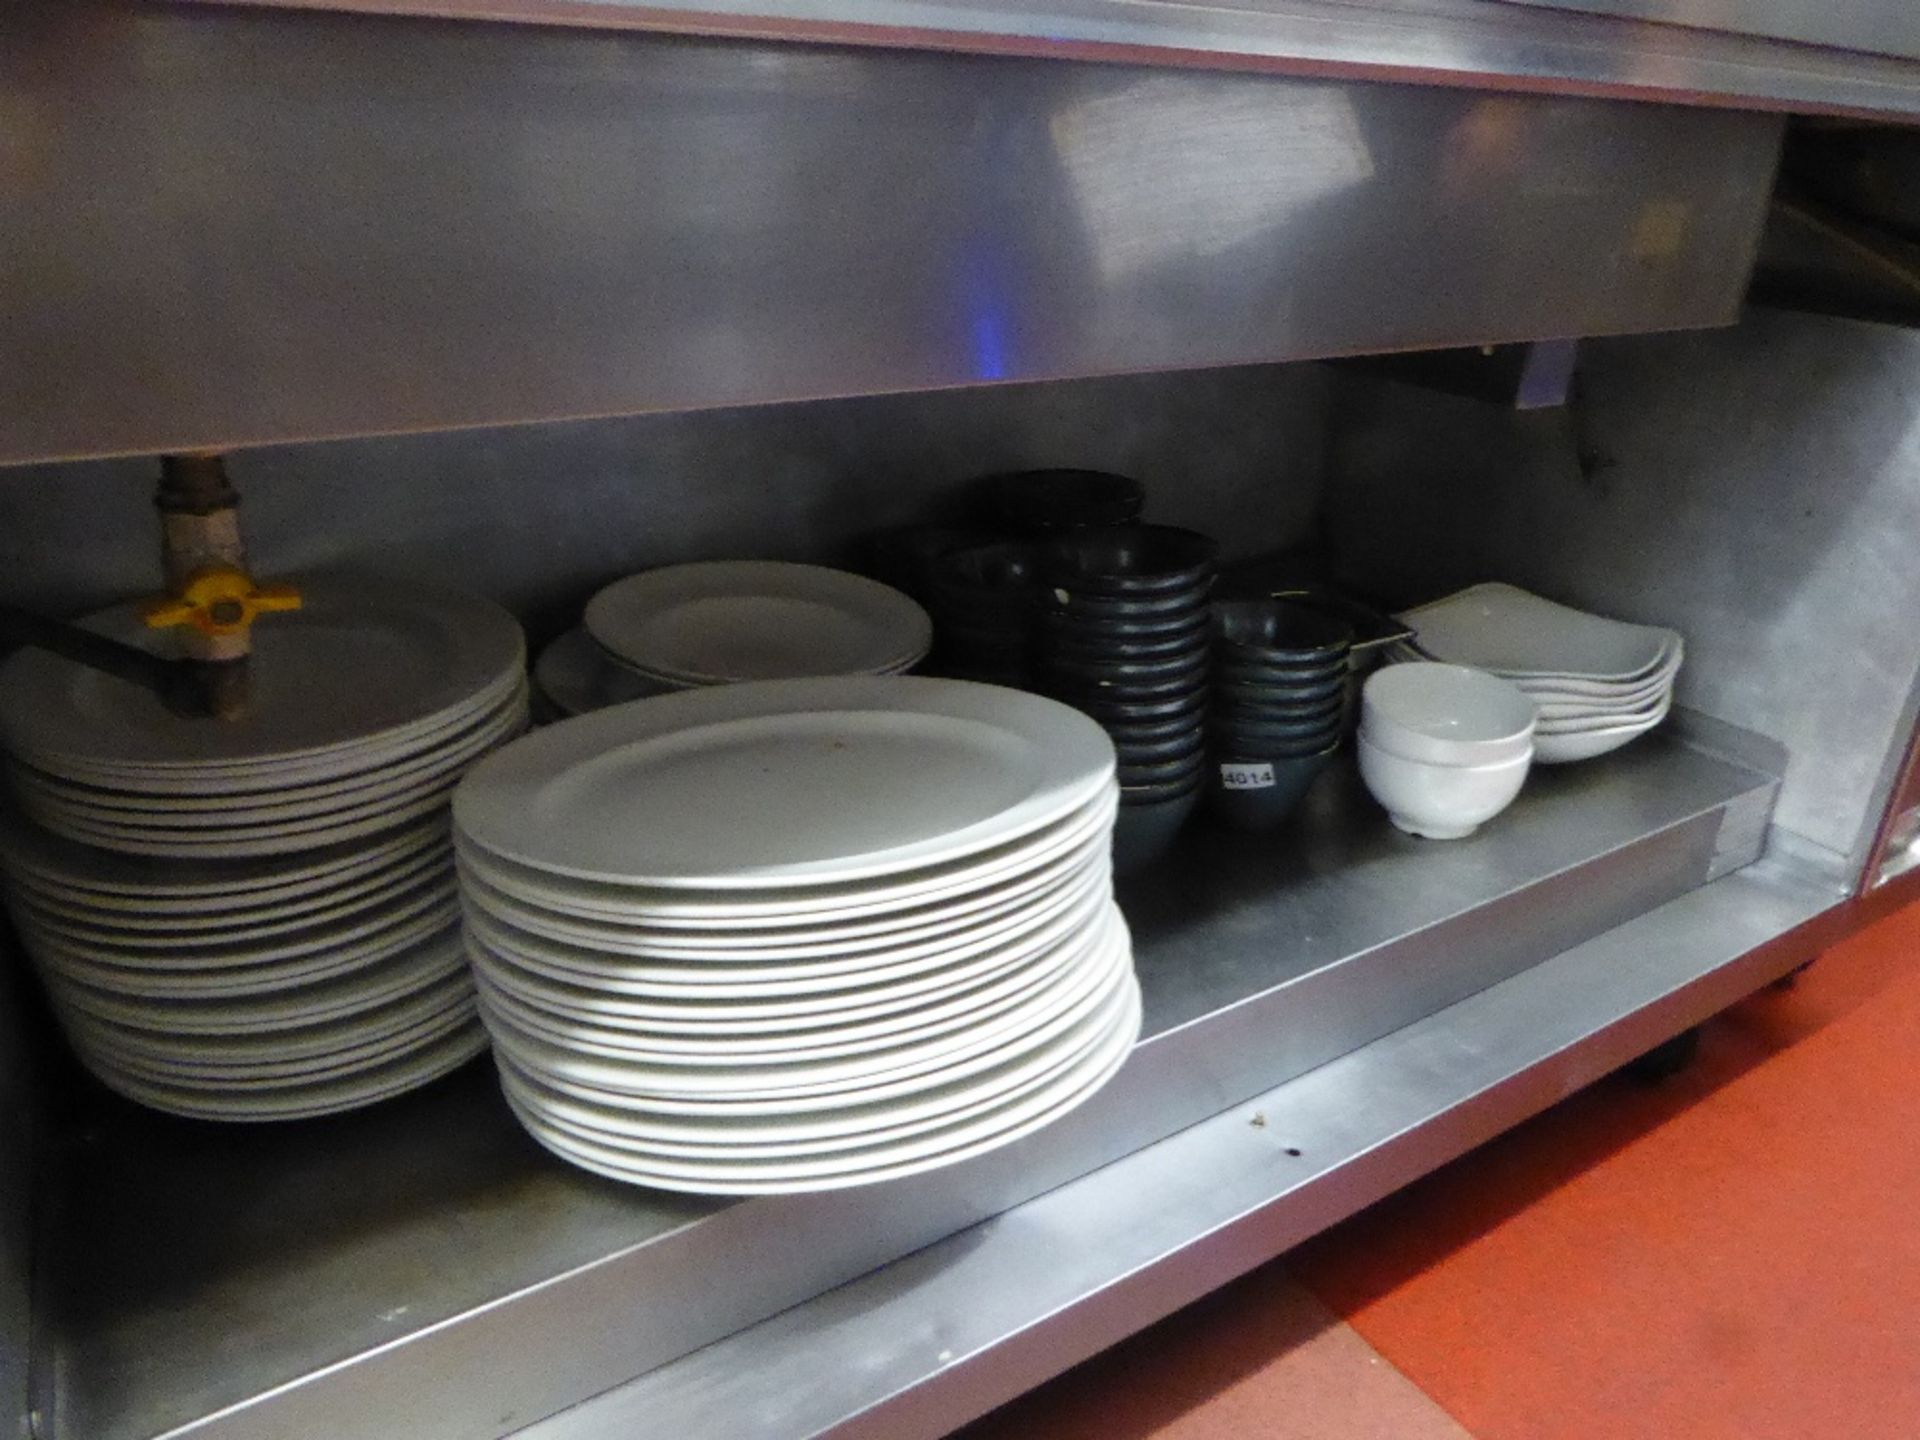 Selection of plates and bowls